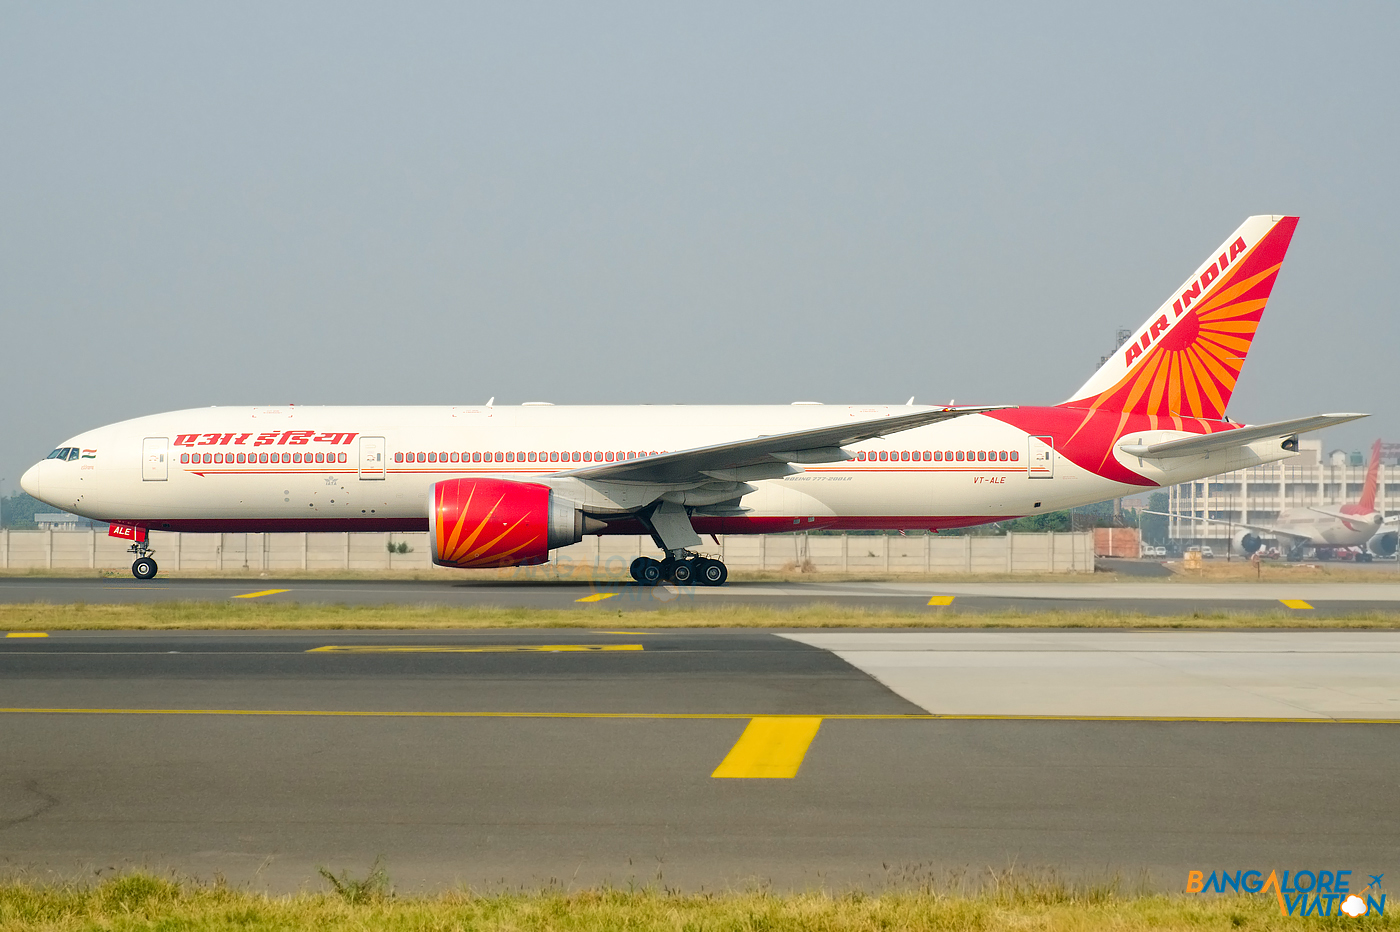 Boeing 777 Price In Inr